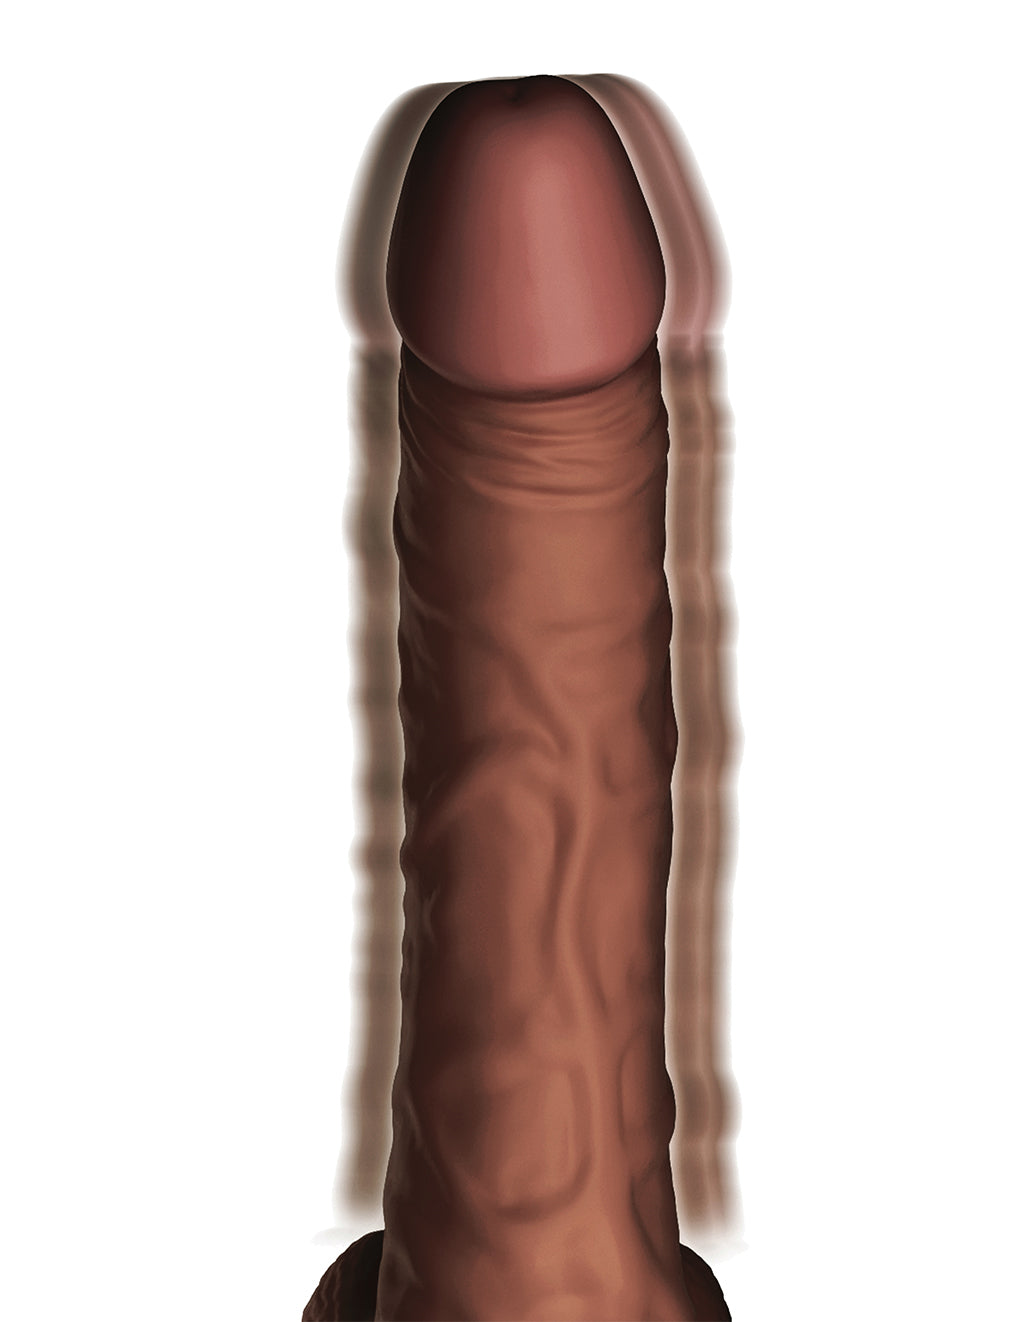 King Cock Plus 7.5" Thrusting Cock with Balls- Vibrating diagram